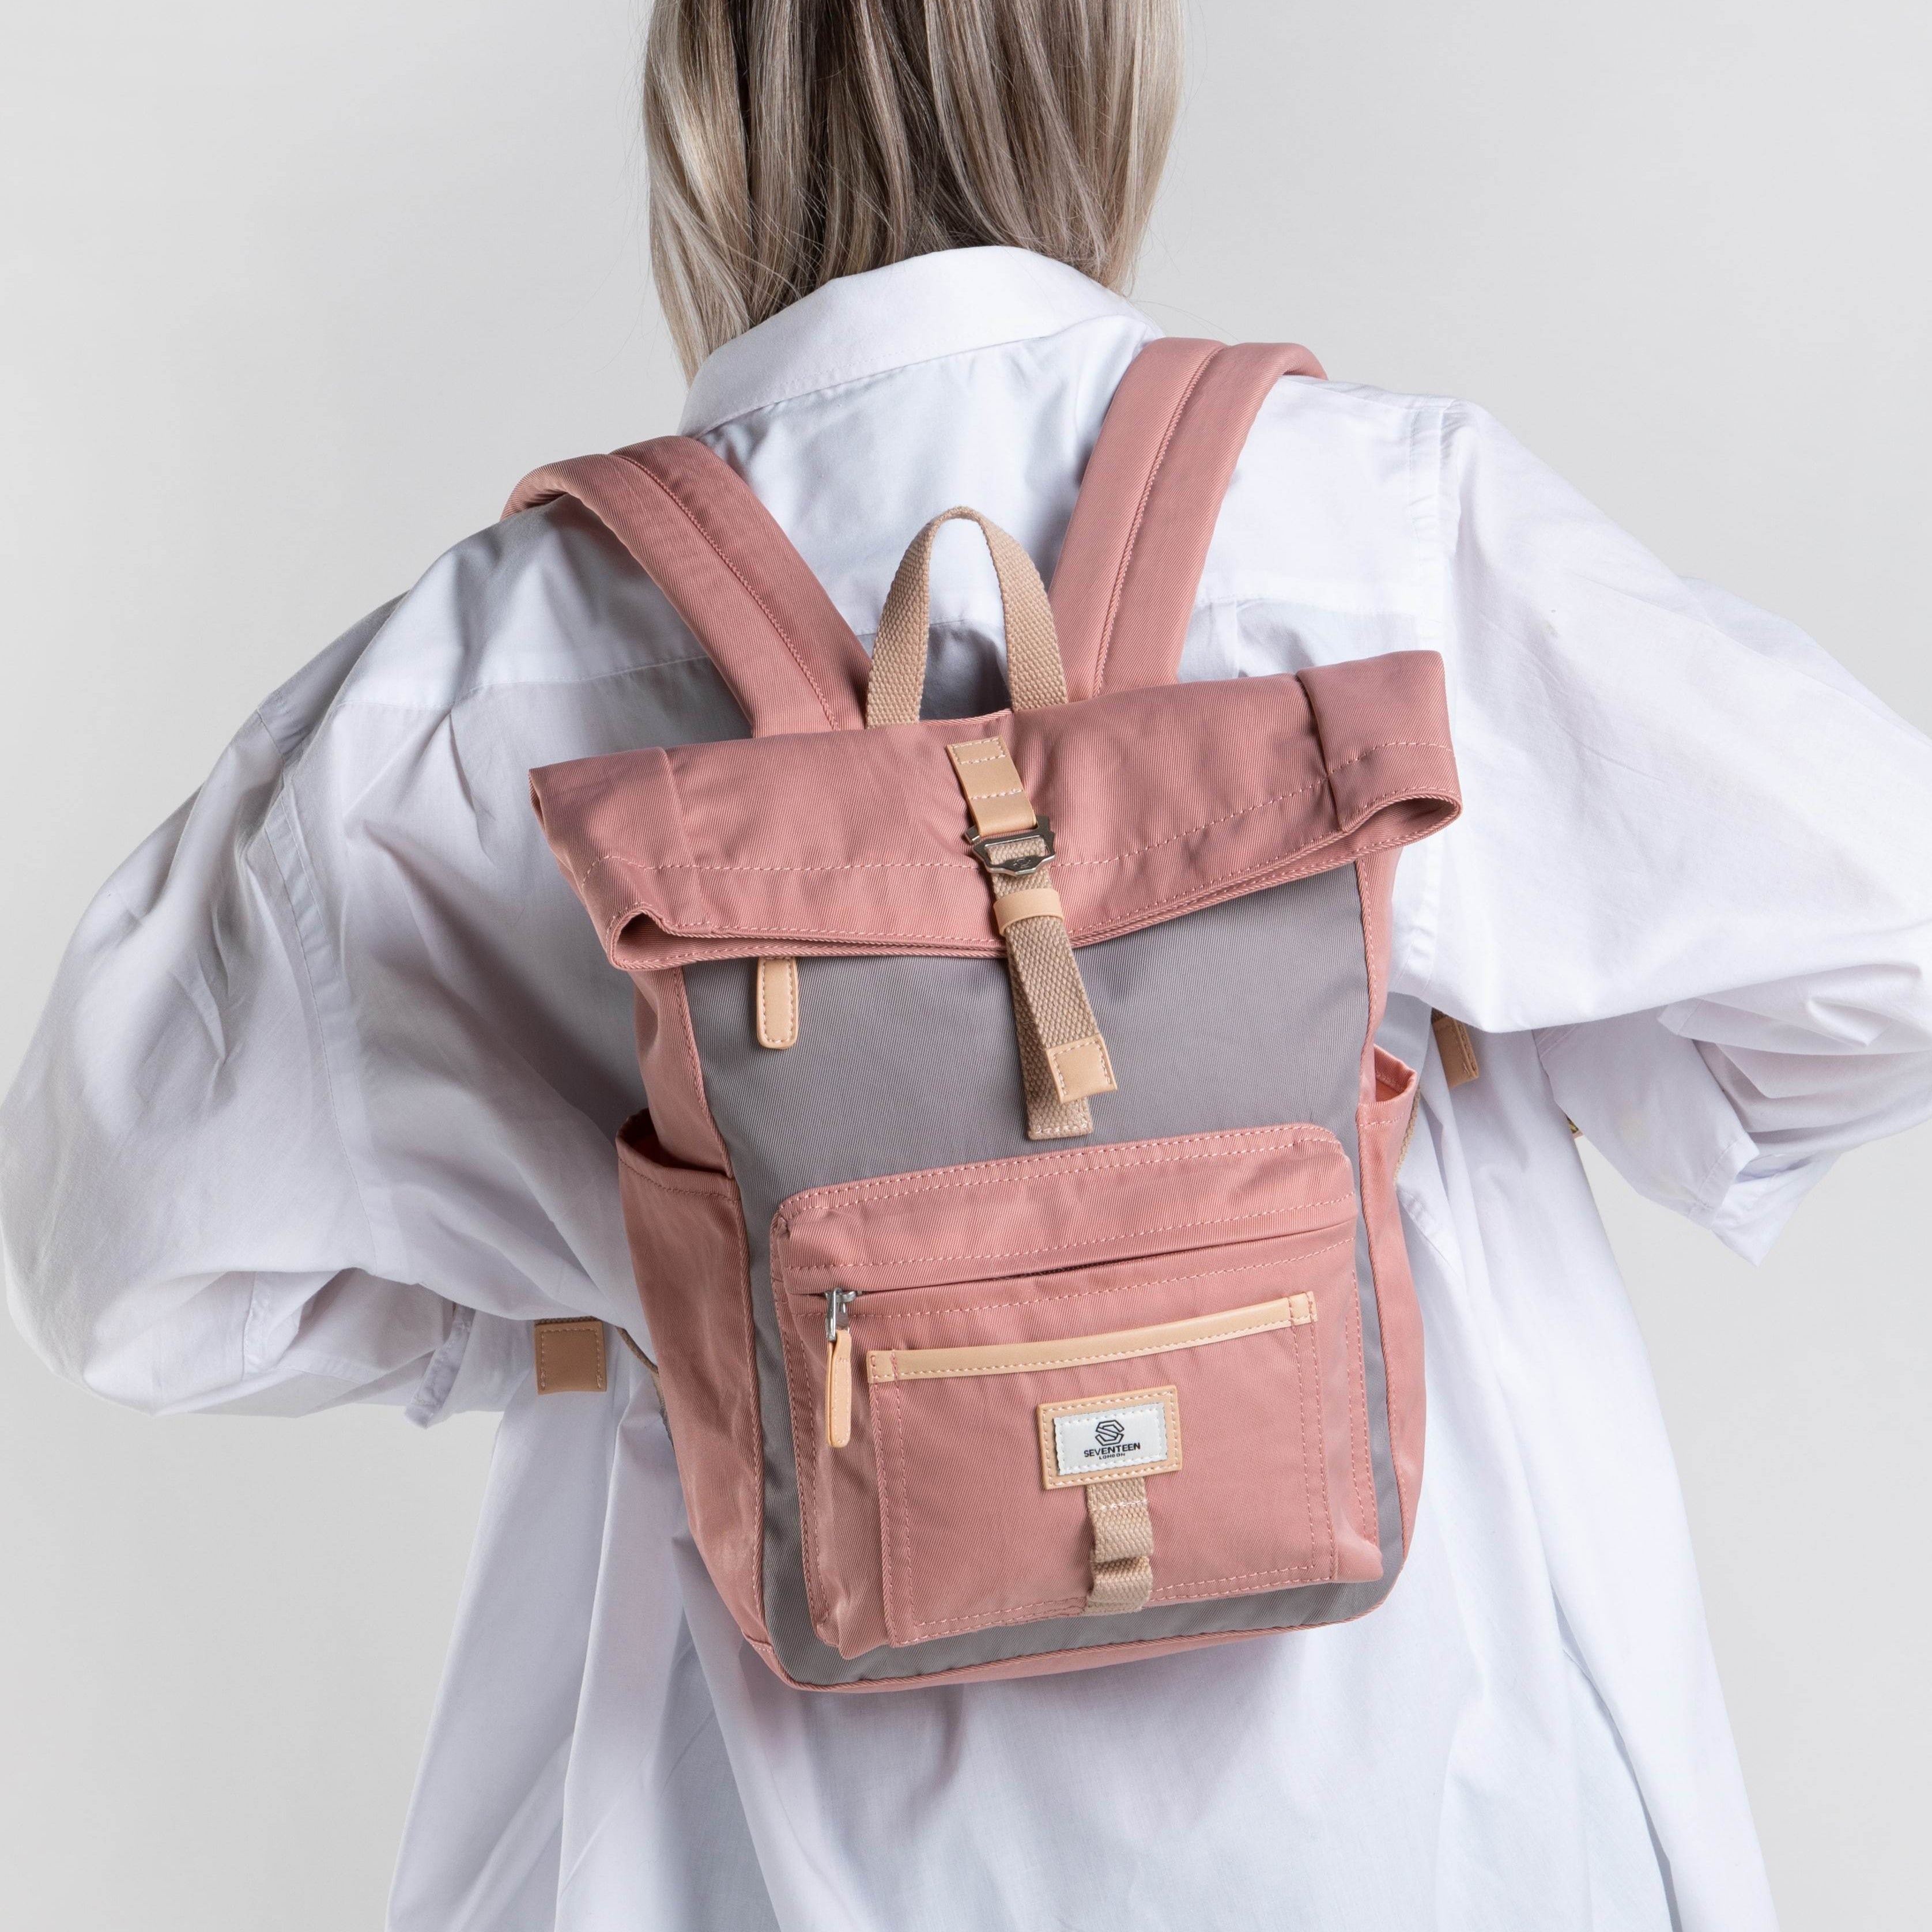 Canary Wharf Mini Backpack - Pink with Grey - Seventeen London